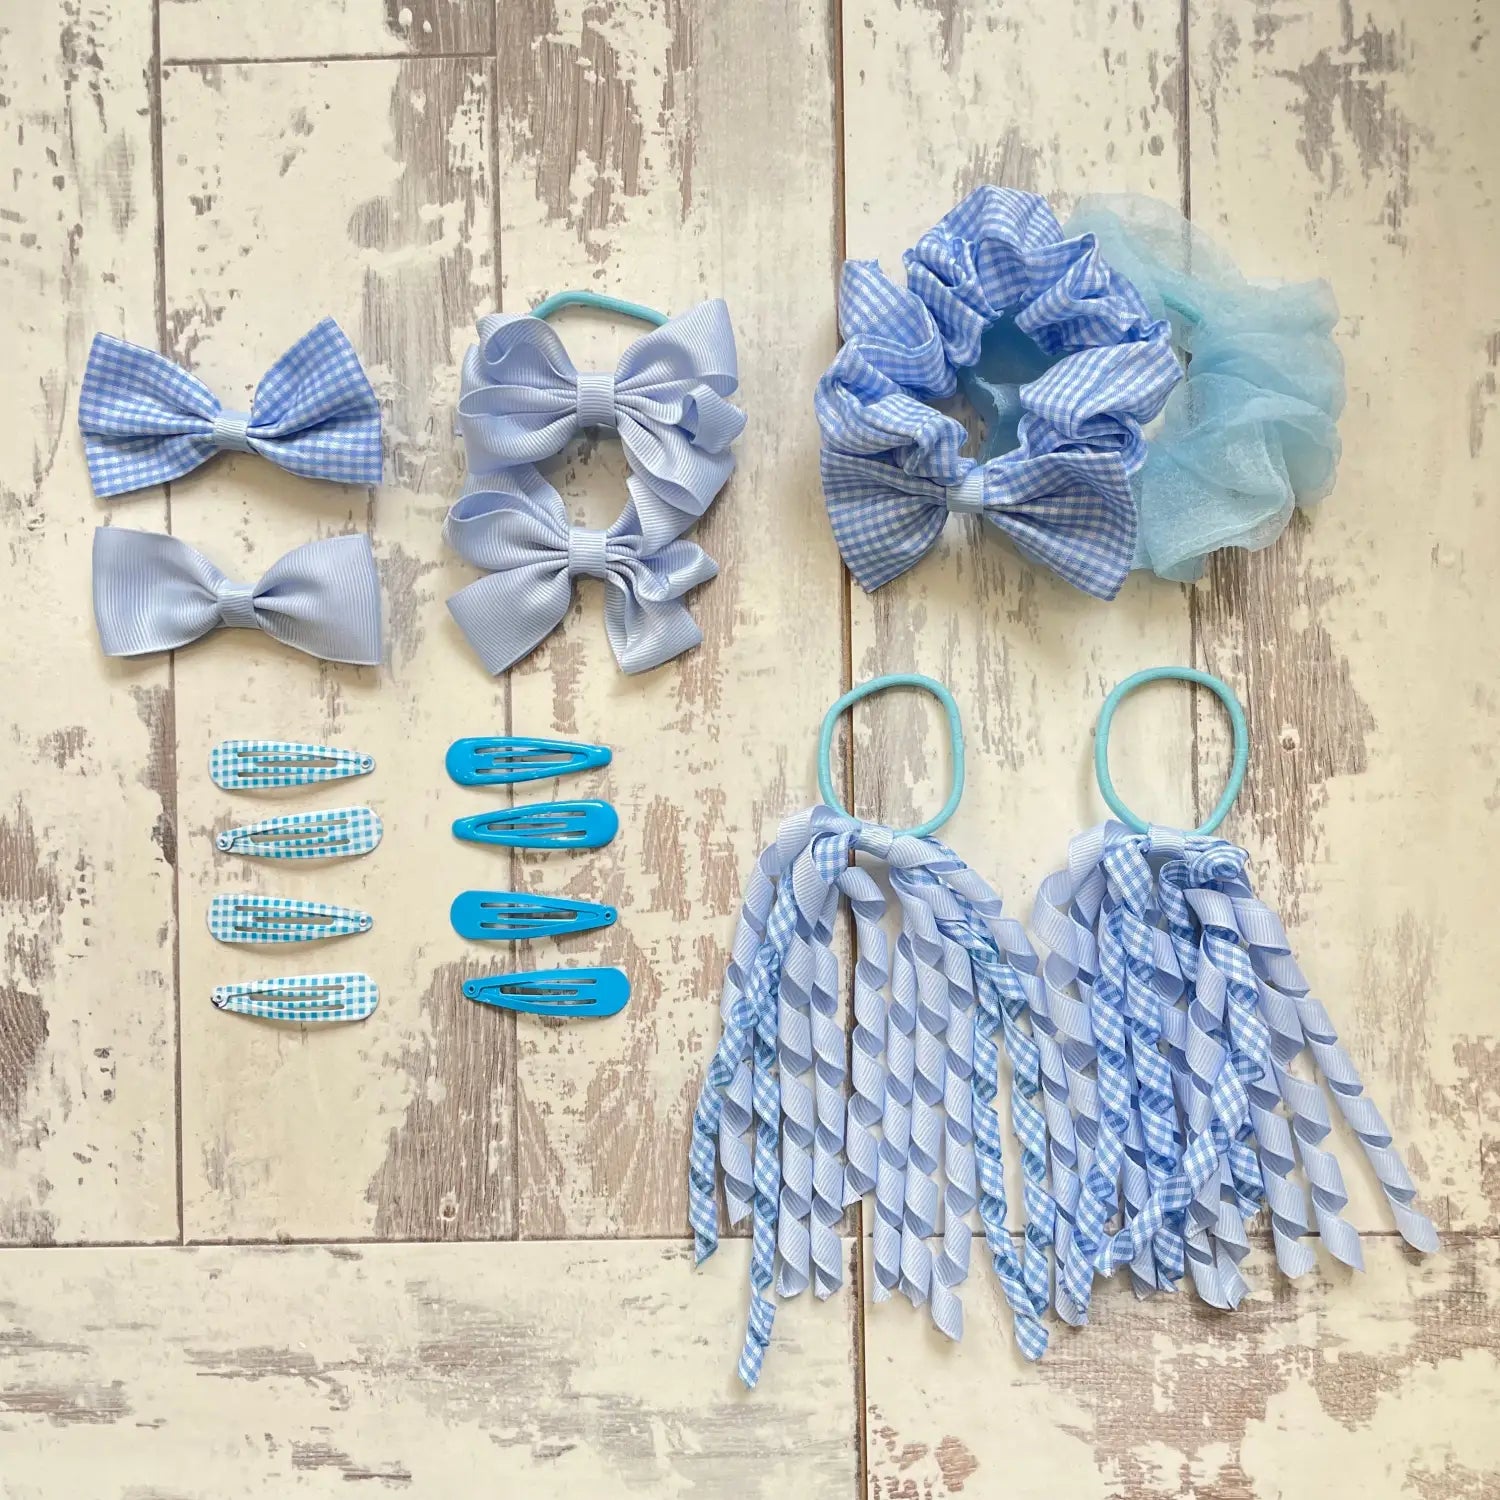 Blue and white gingham check school girl hair bows in 16PCS set.